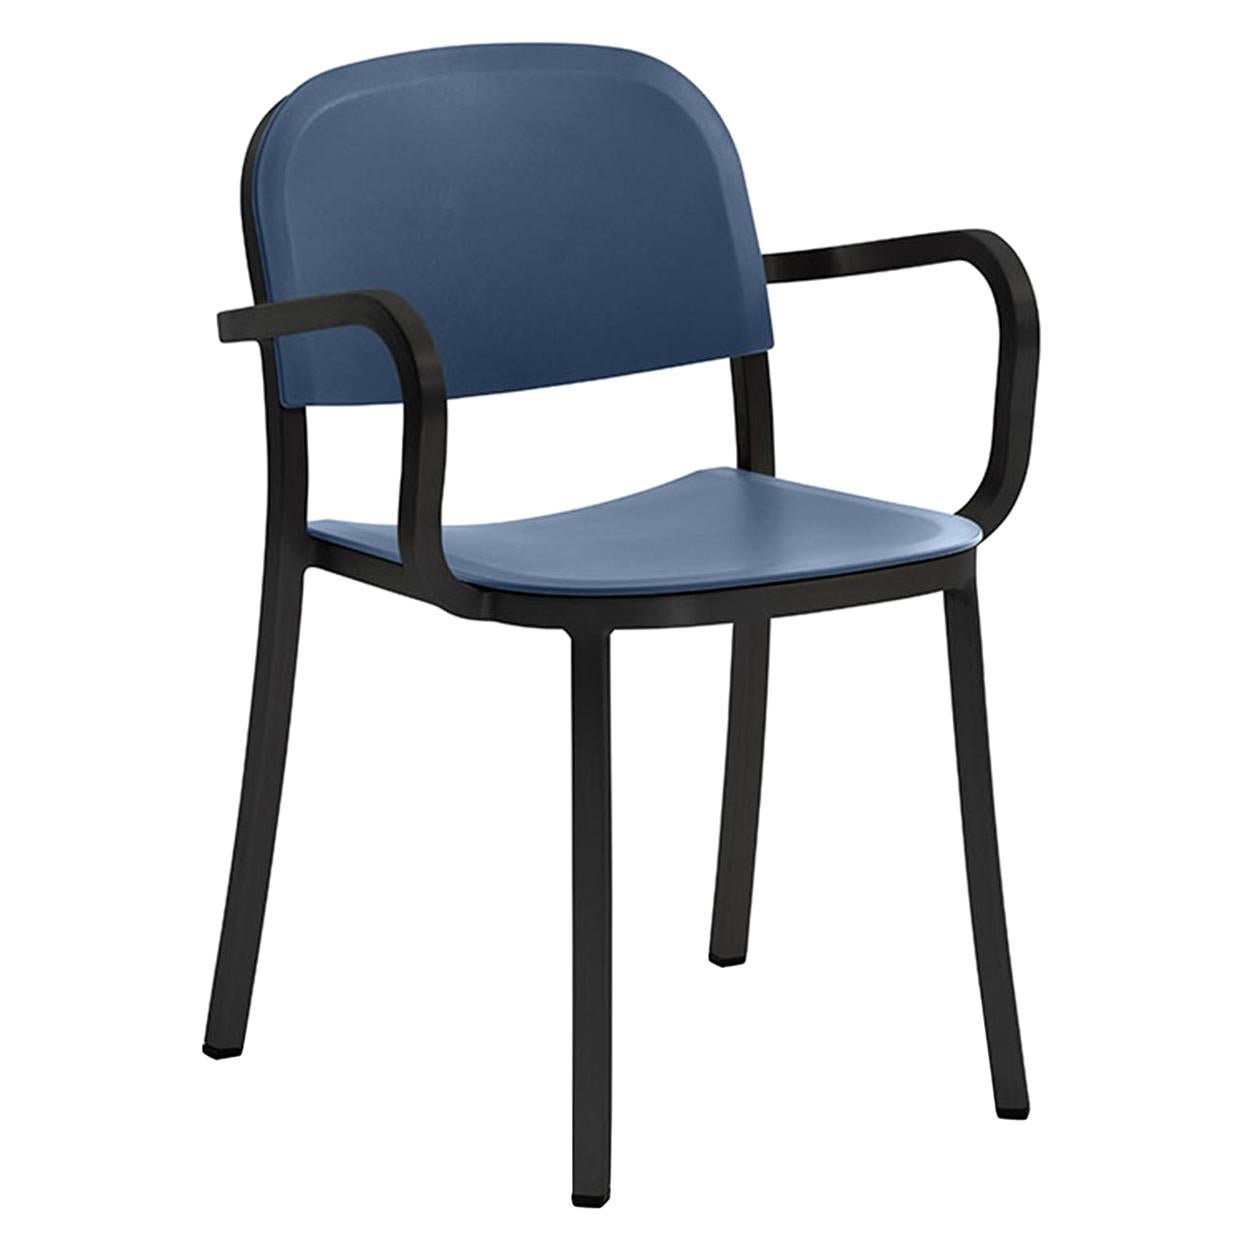 Emeco 1 Inch Armchair in Dark Powder-Coated Aluminum and Blue by Jasper Morrison For Sale